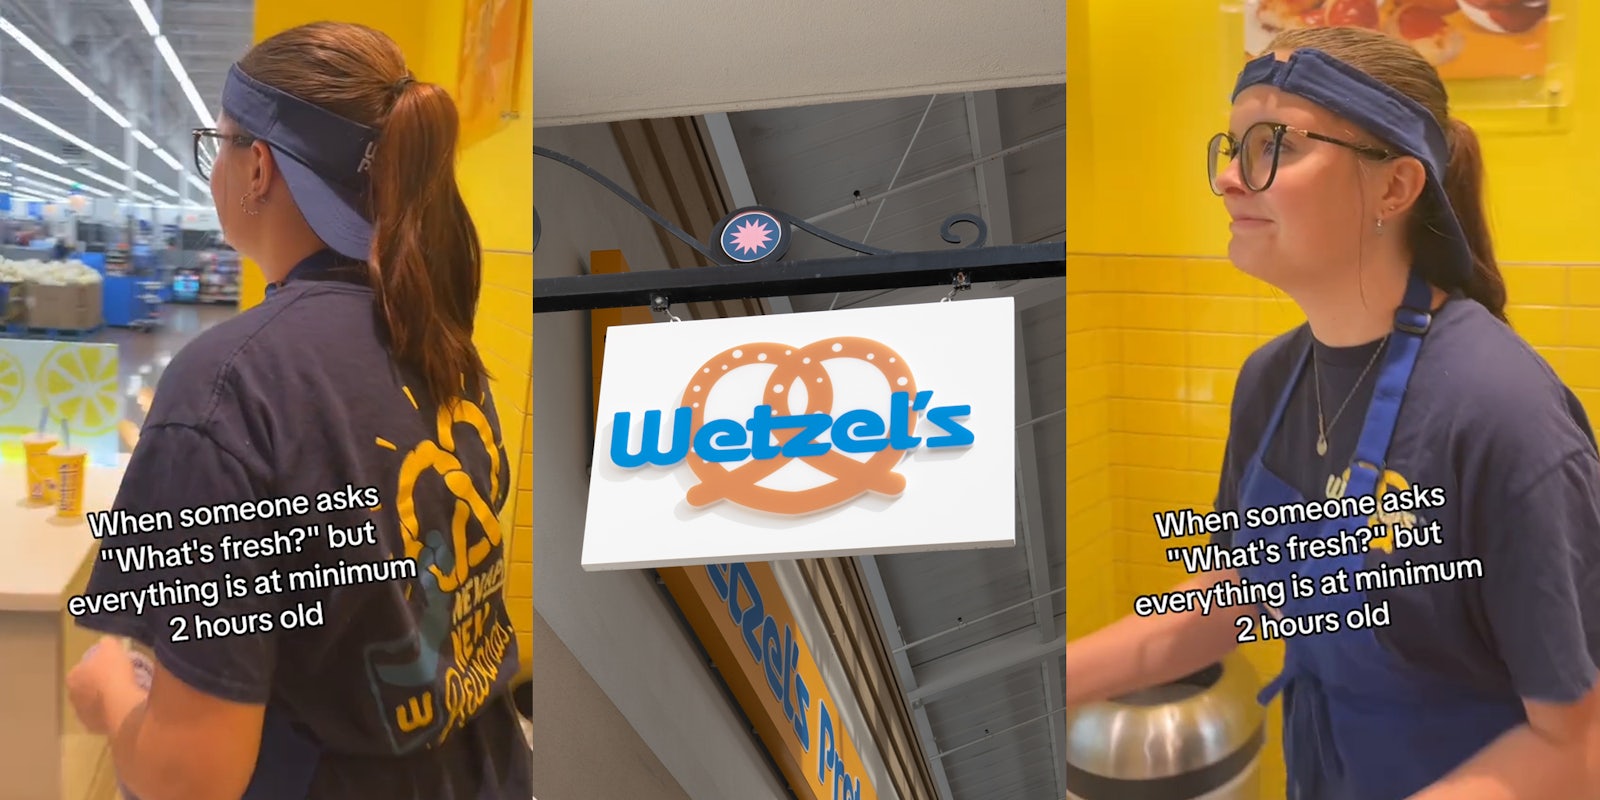 Wetzel's worker with caption 'When someone asks 'What's fresh?' but everything is at minimum 2 hours old' (l) Wetzel's Pretzels sign (c) Wetzel's worker with caption 'When someone asks 'What's fresh?' but everything is at minimum 2 hours old' (r)